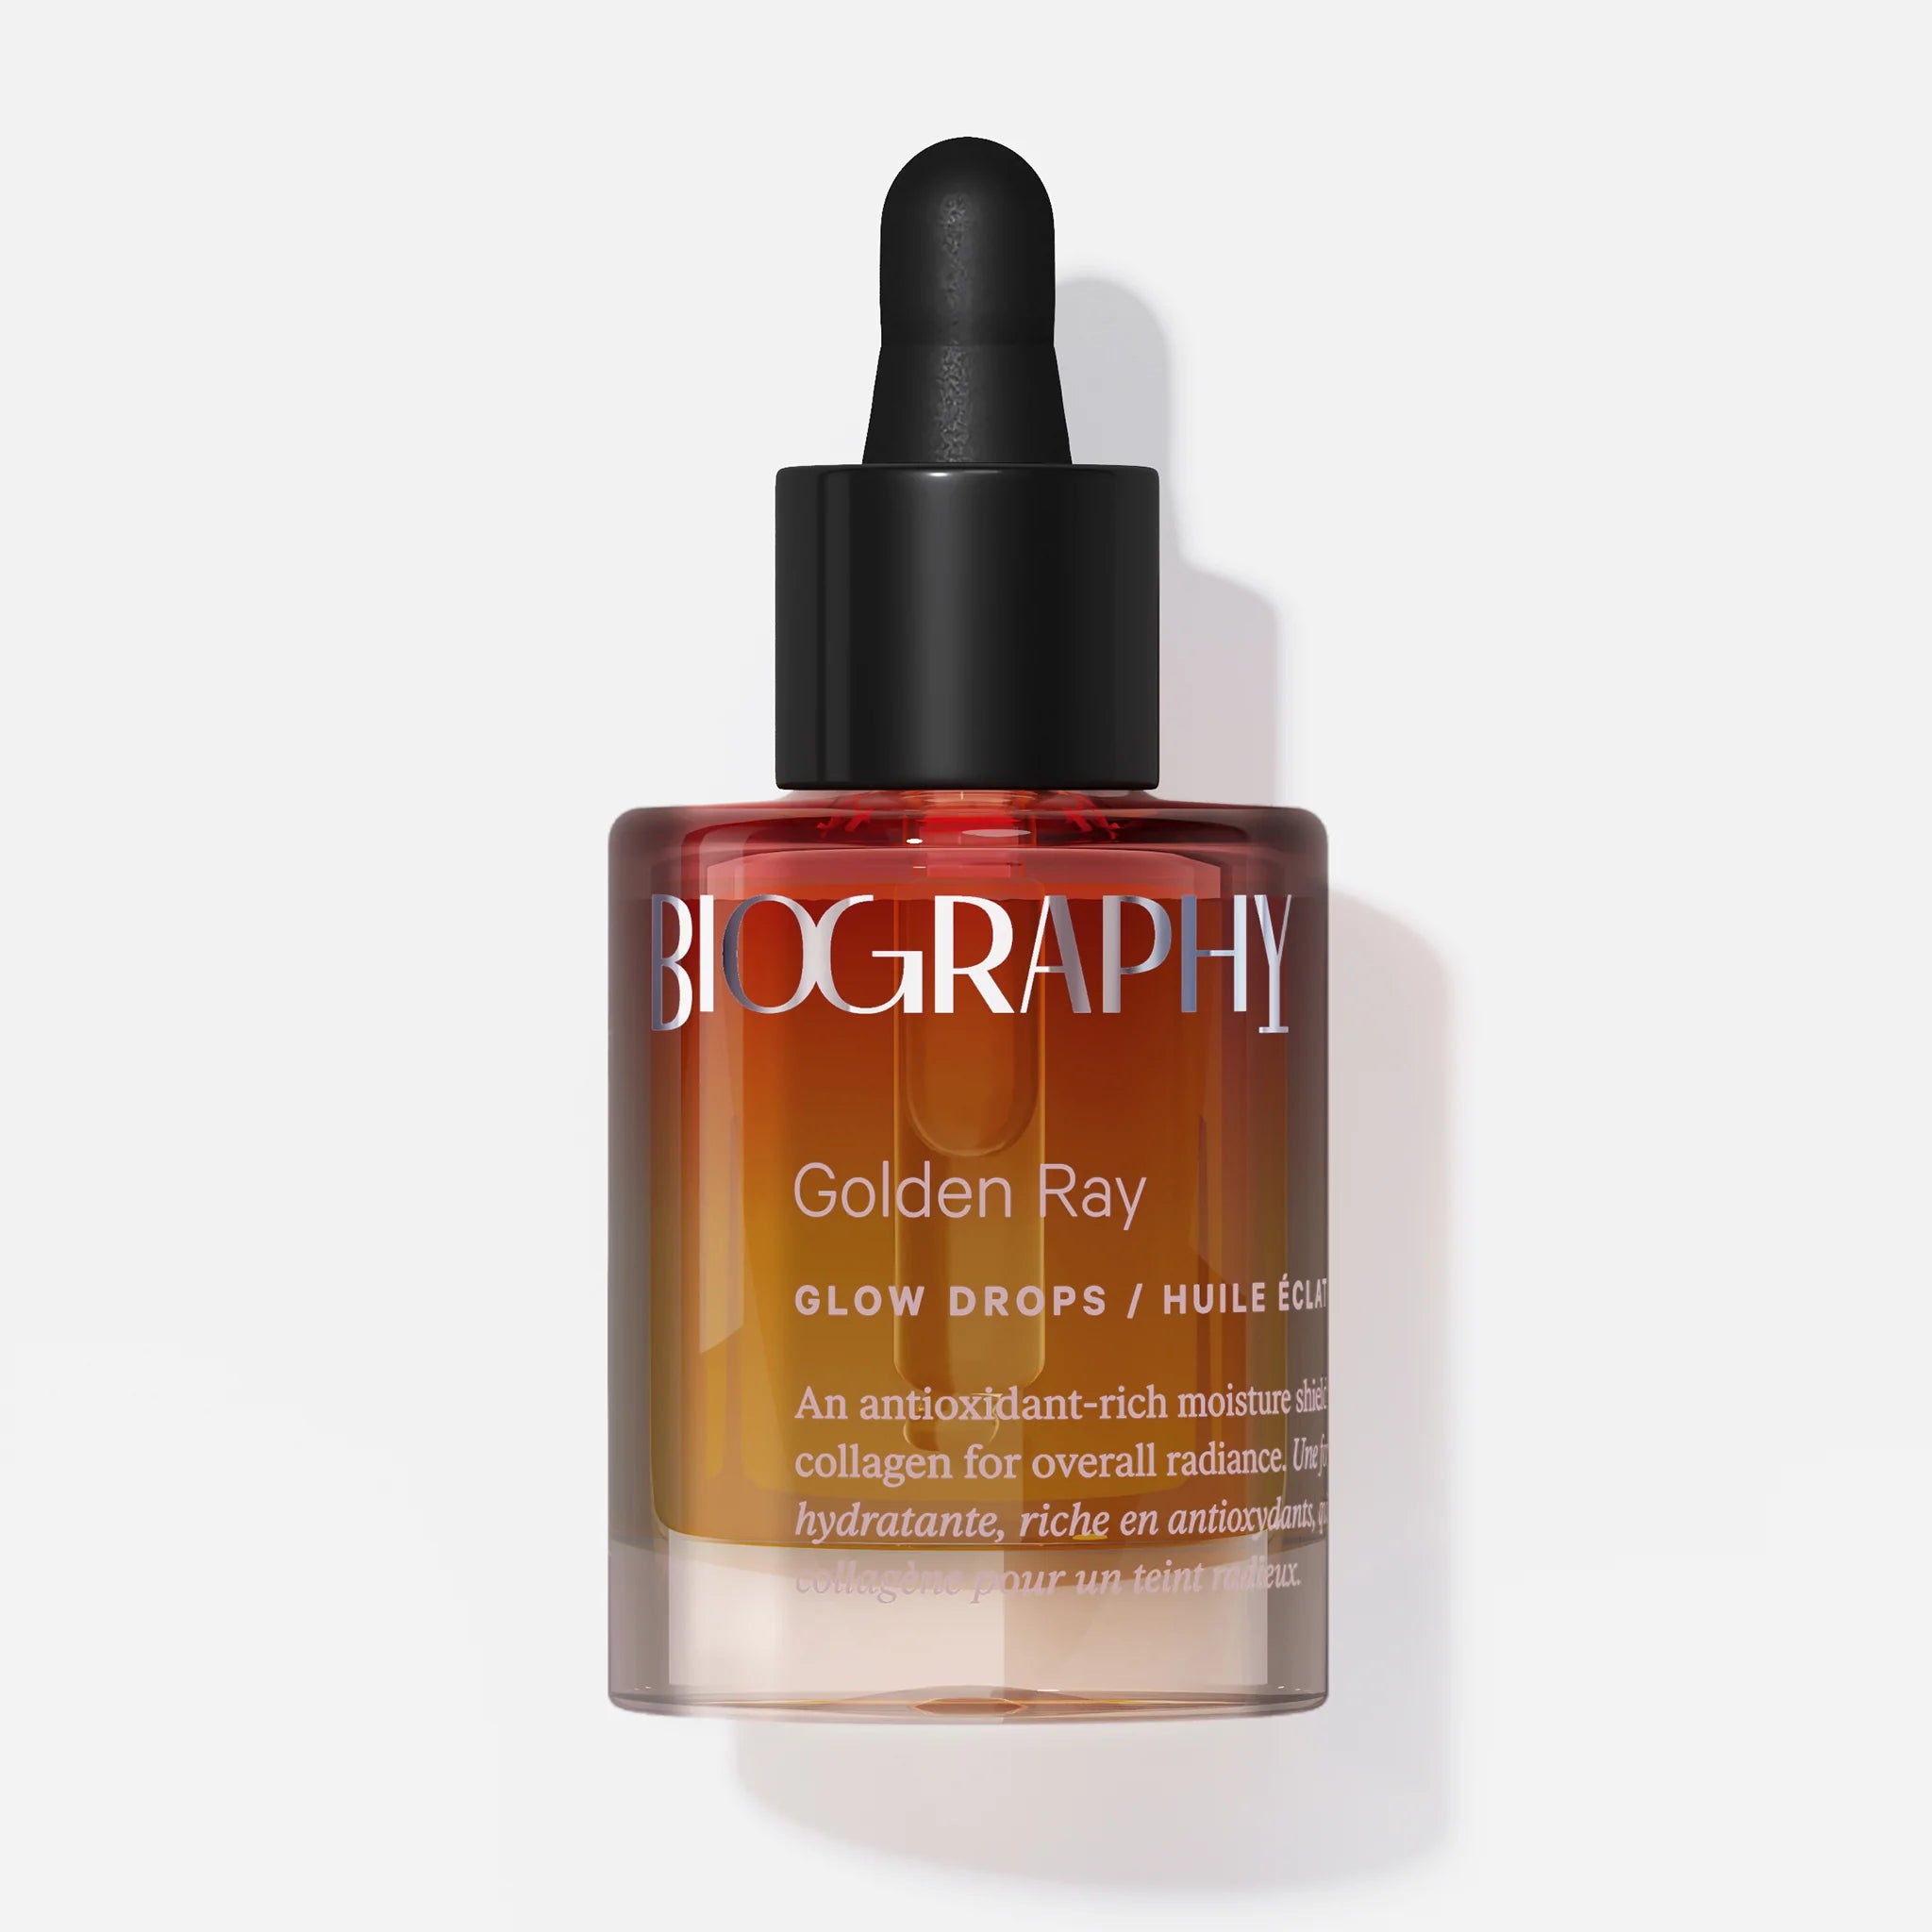 Golden Ray Glow Drops